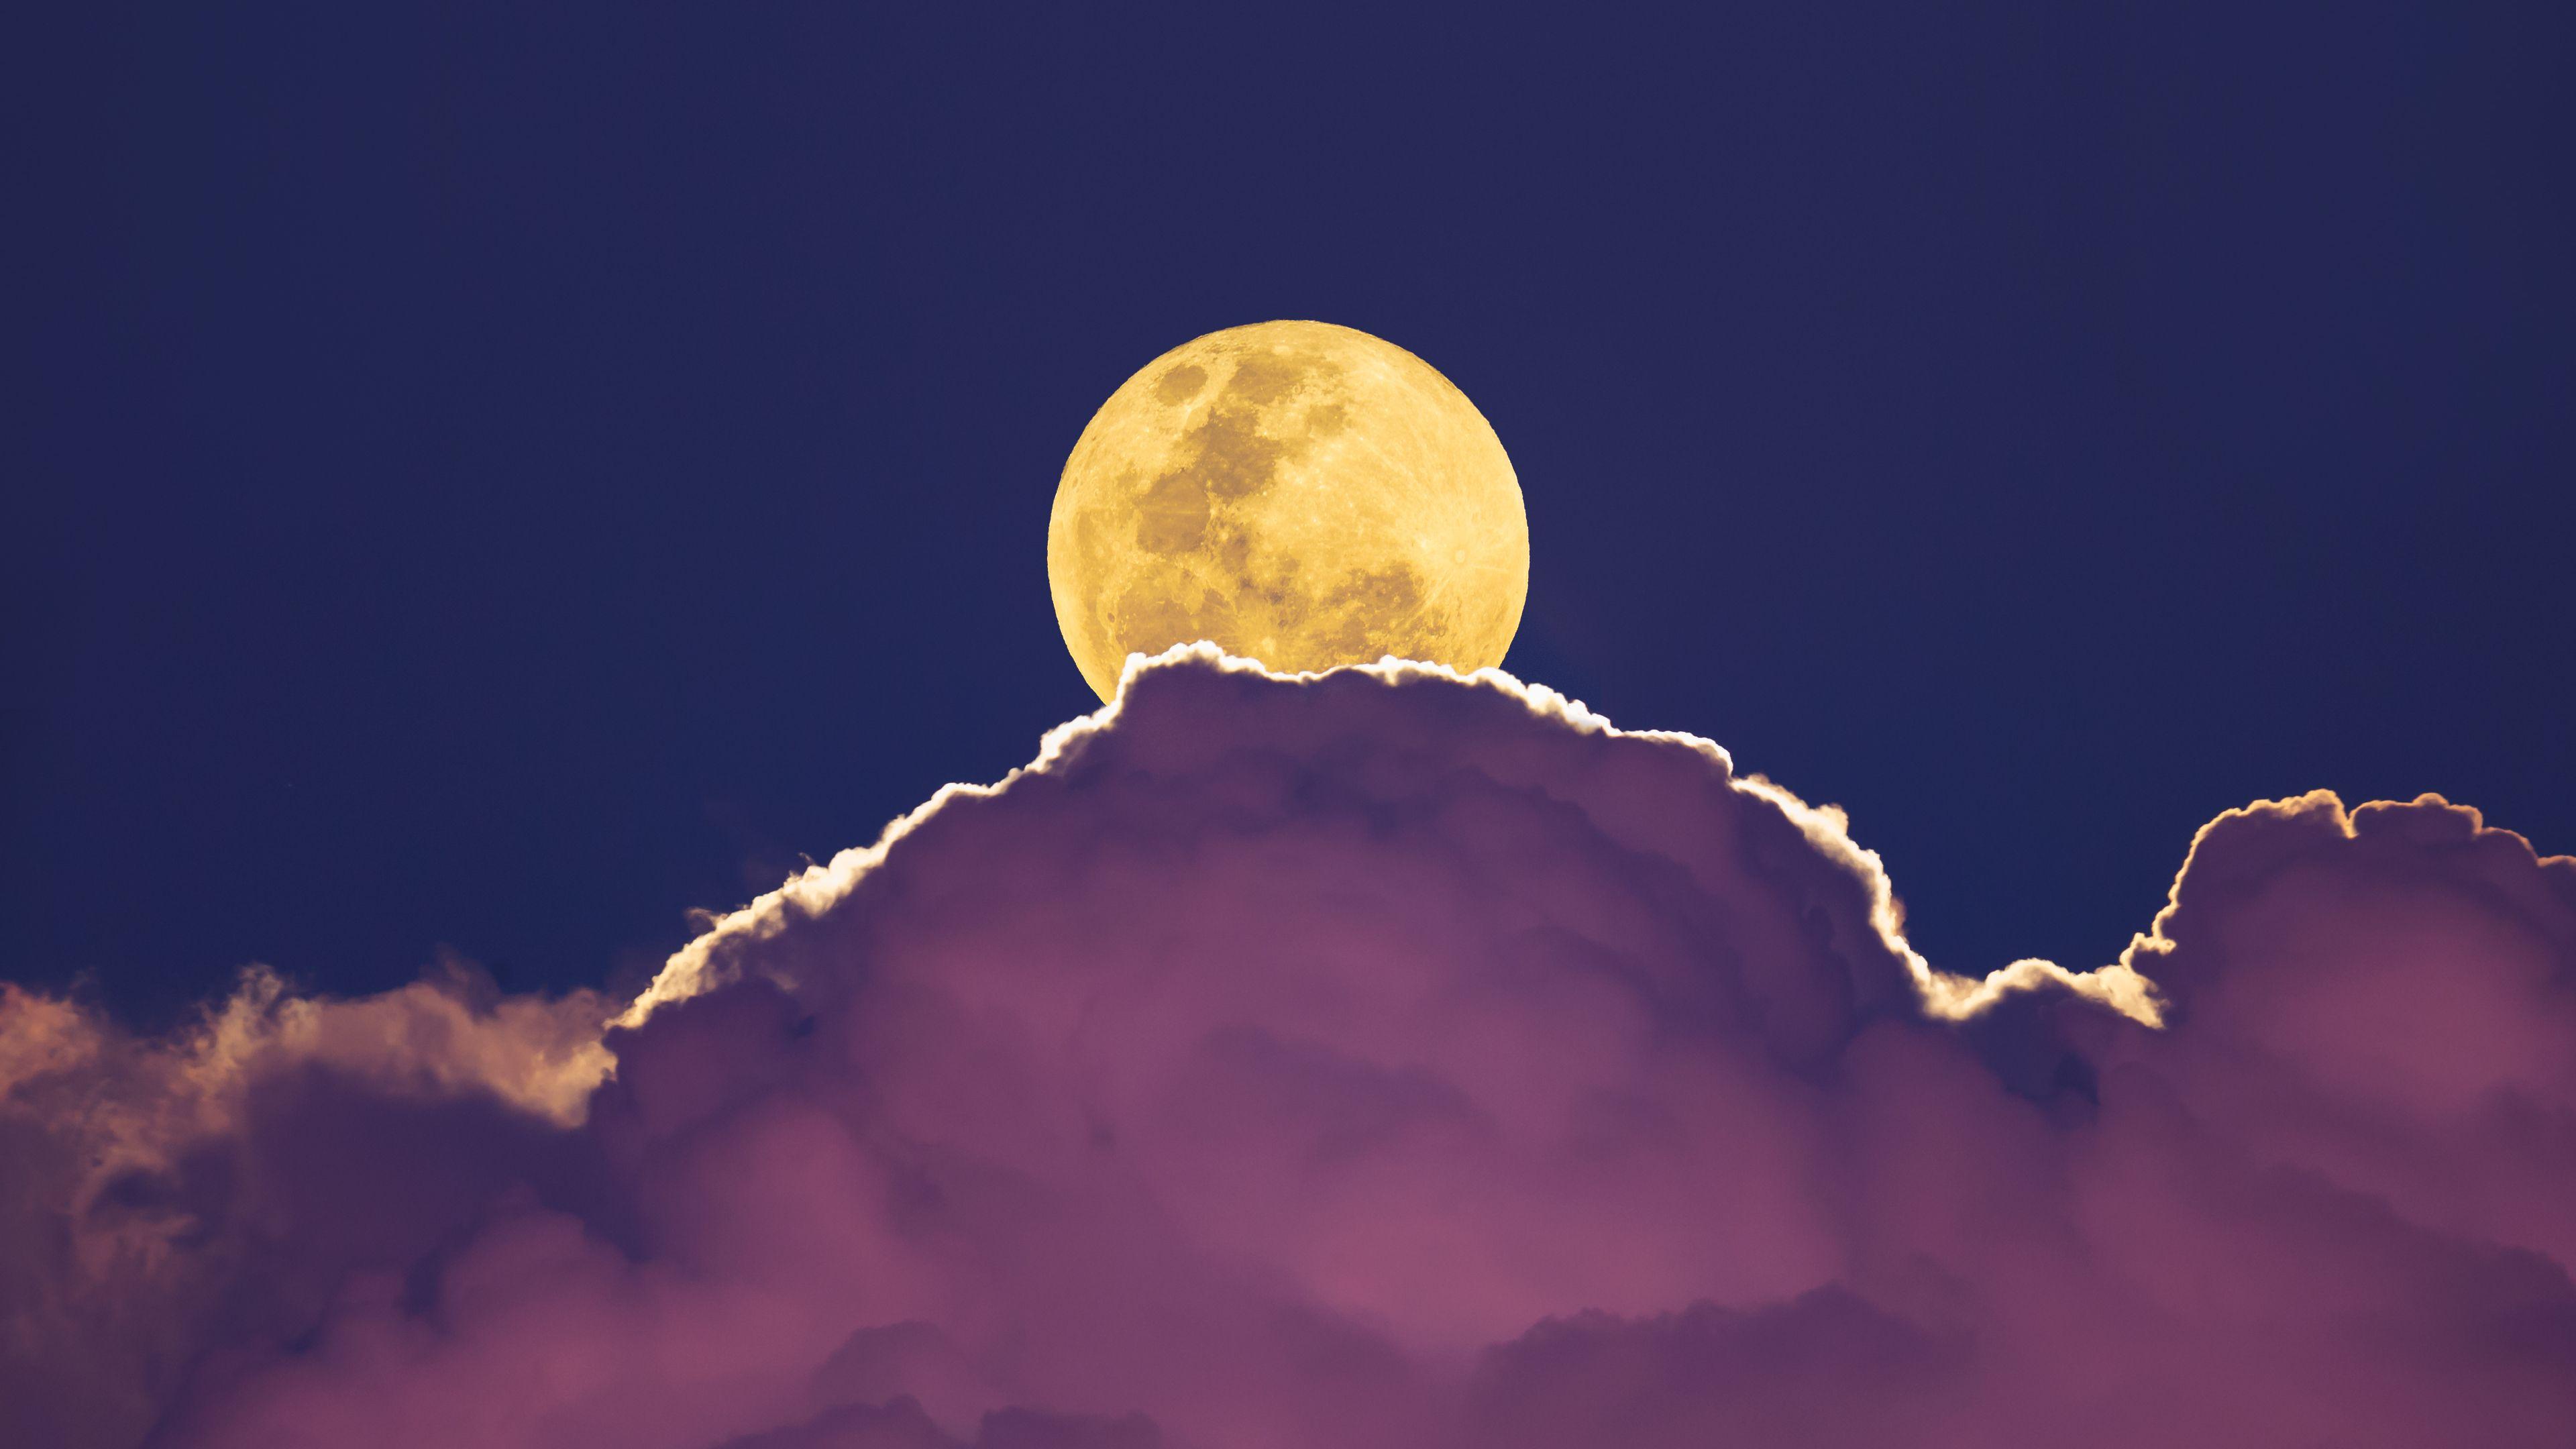 Wallpaper Supermoon, Full moon, Clouds, 4K, Nature